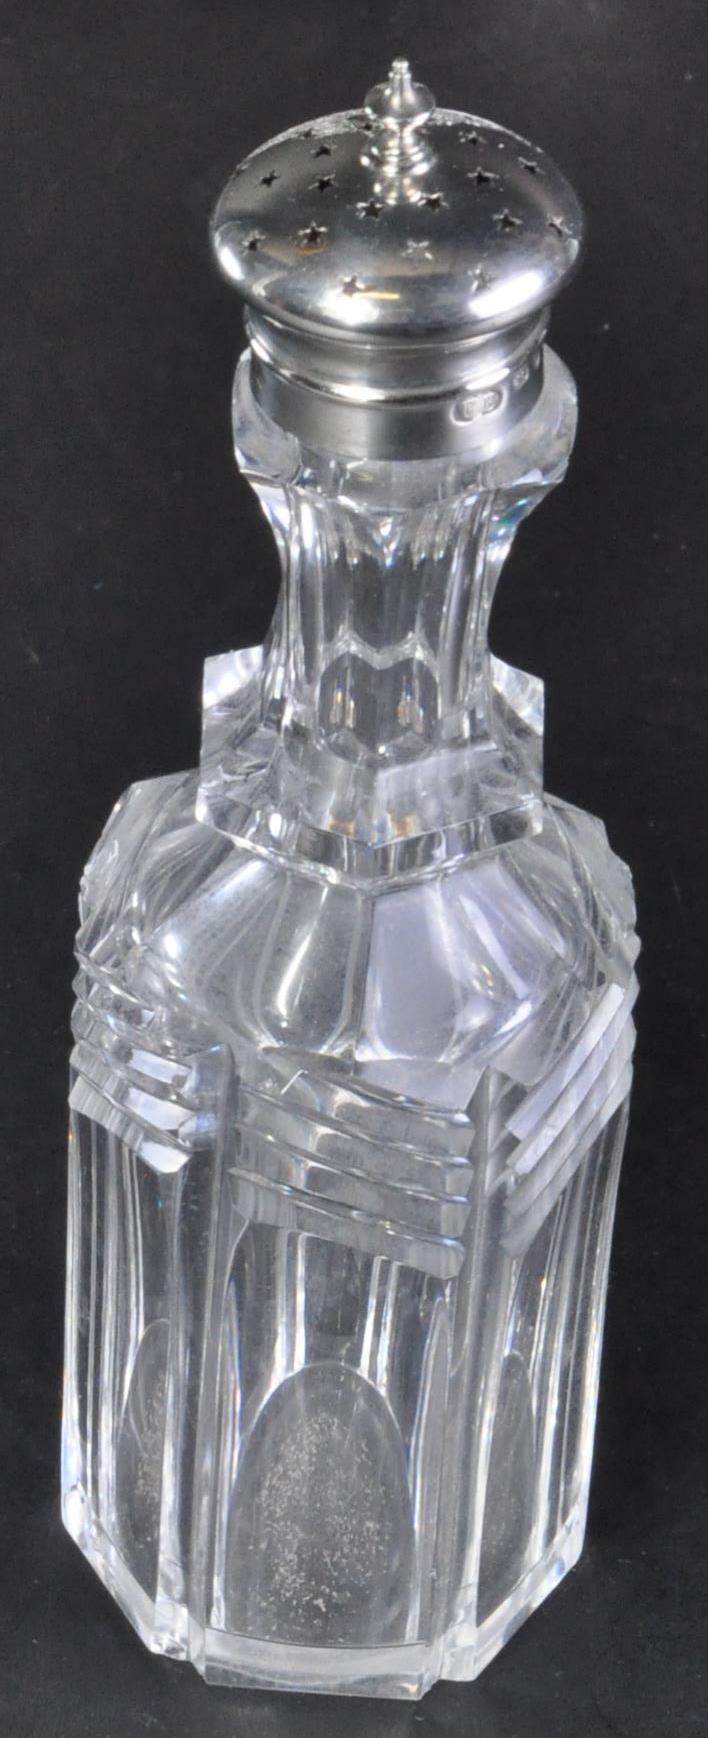 VICTORIAN ELKINGTON SILVER PLATED AND CUT GLASS CRUET SET - Image 3 of 7